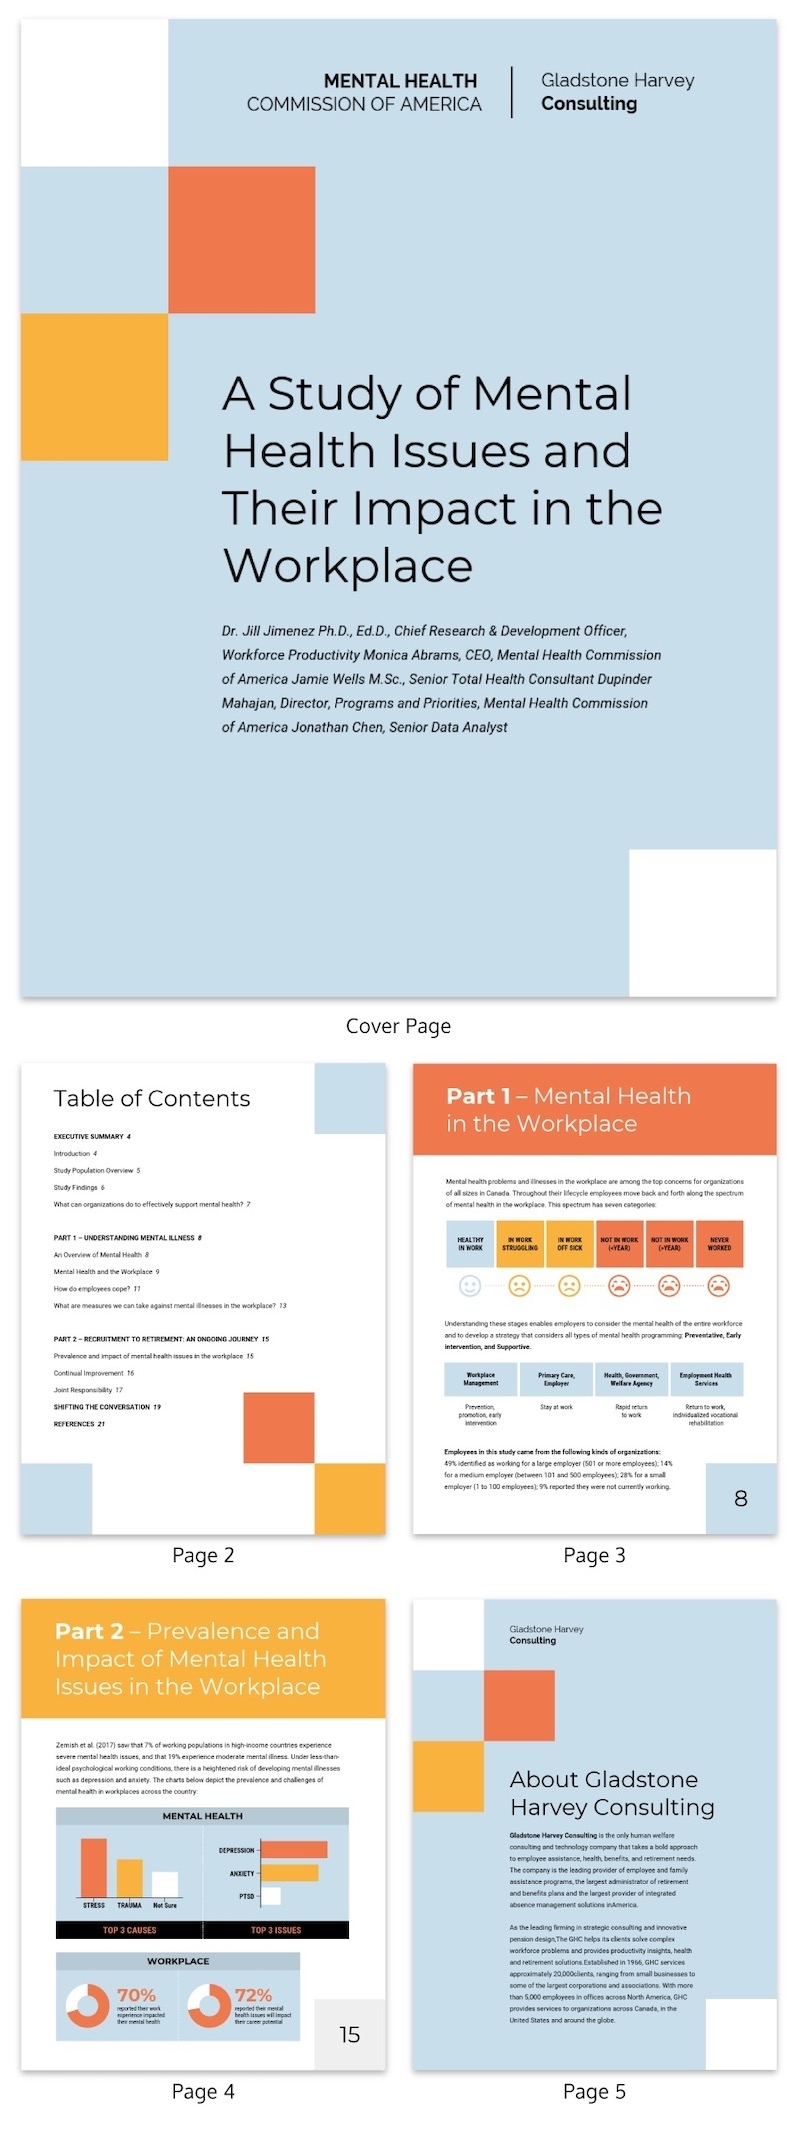 20+ White Paper Examples, Templates + Design Tips - Venngage With Regard To White Paper Report Template